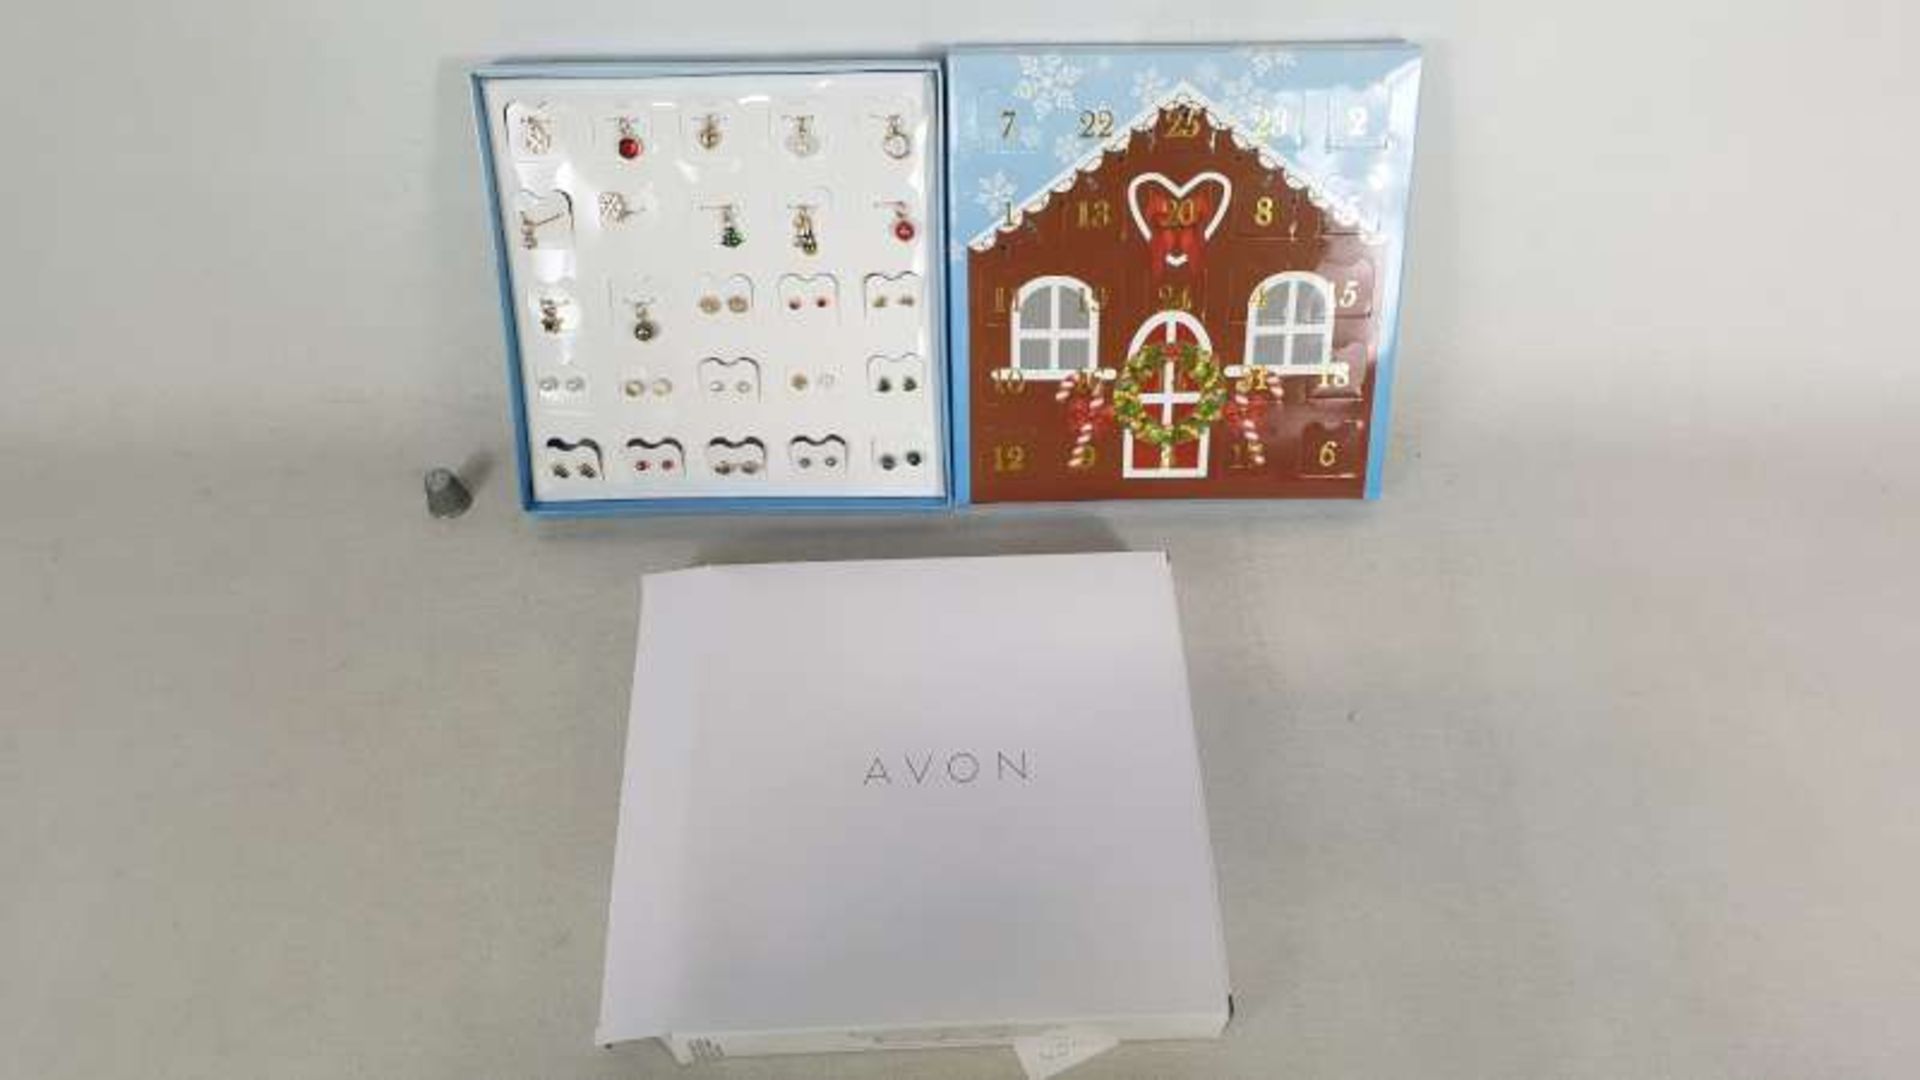 22 X AVON NORDIC NOEL ADVENT CALENDER GIFT SETS, EACH SET CONTAINS 1 X NECKLACE, 12 X INTERCHAGEABLE